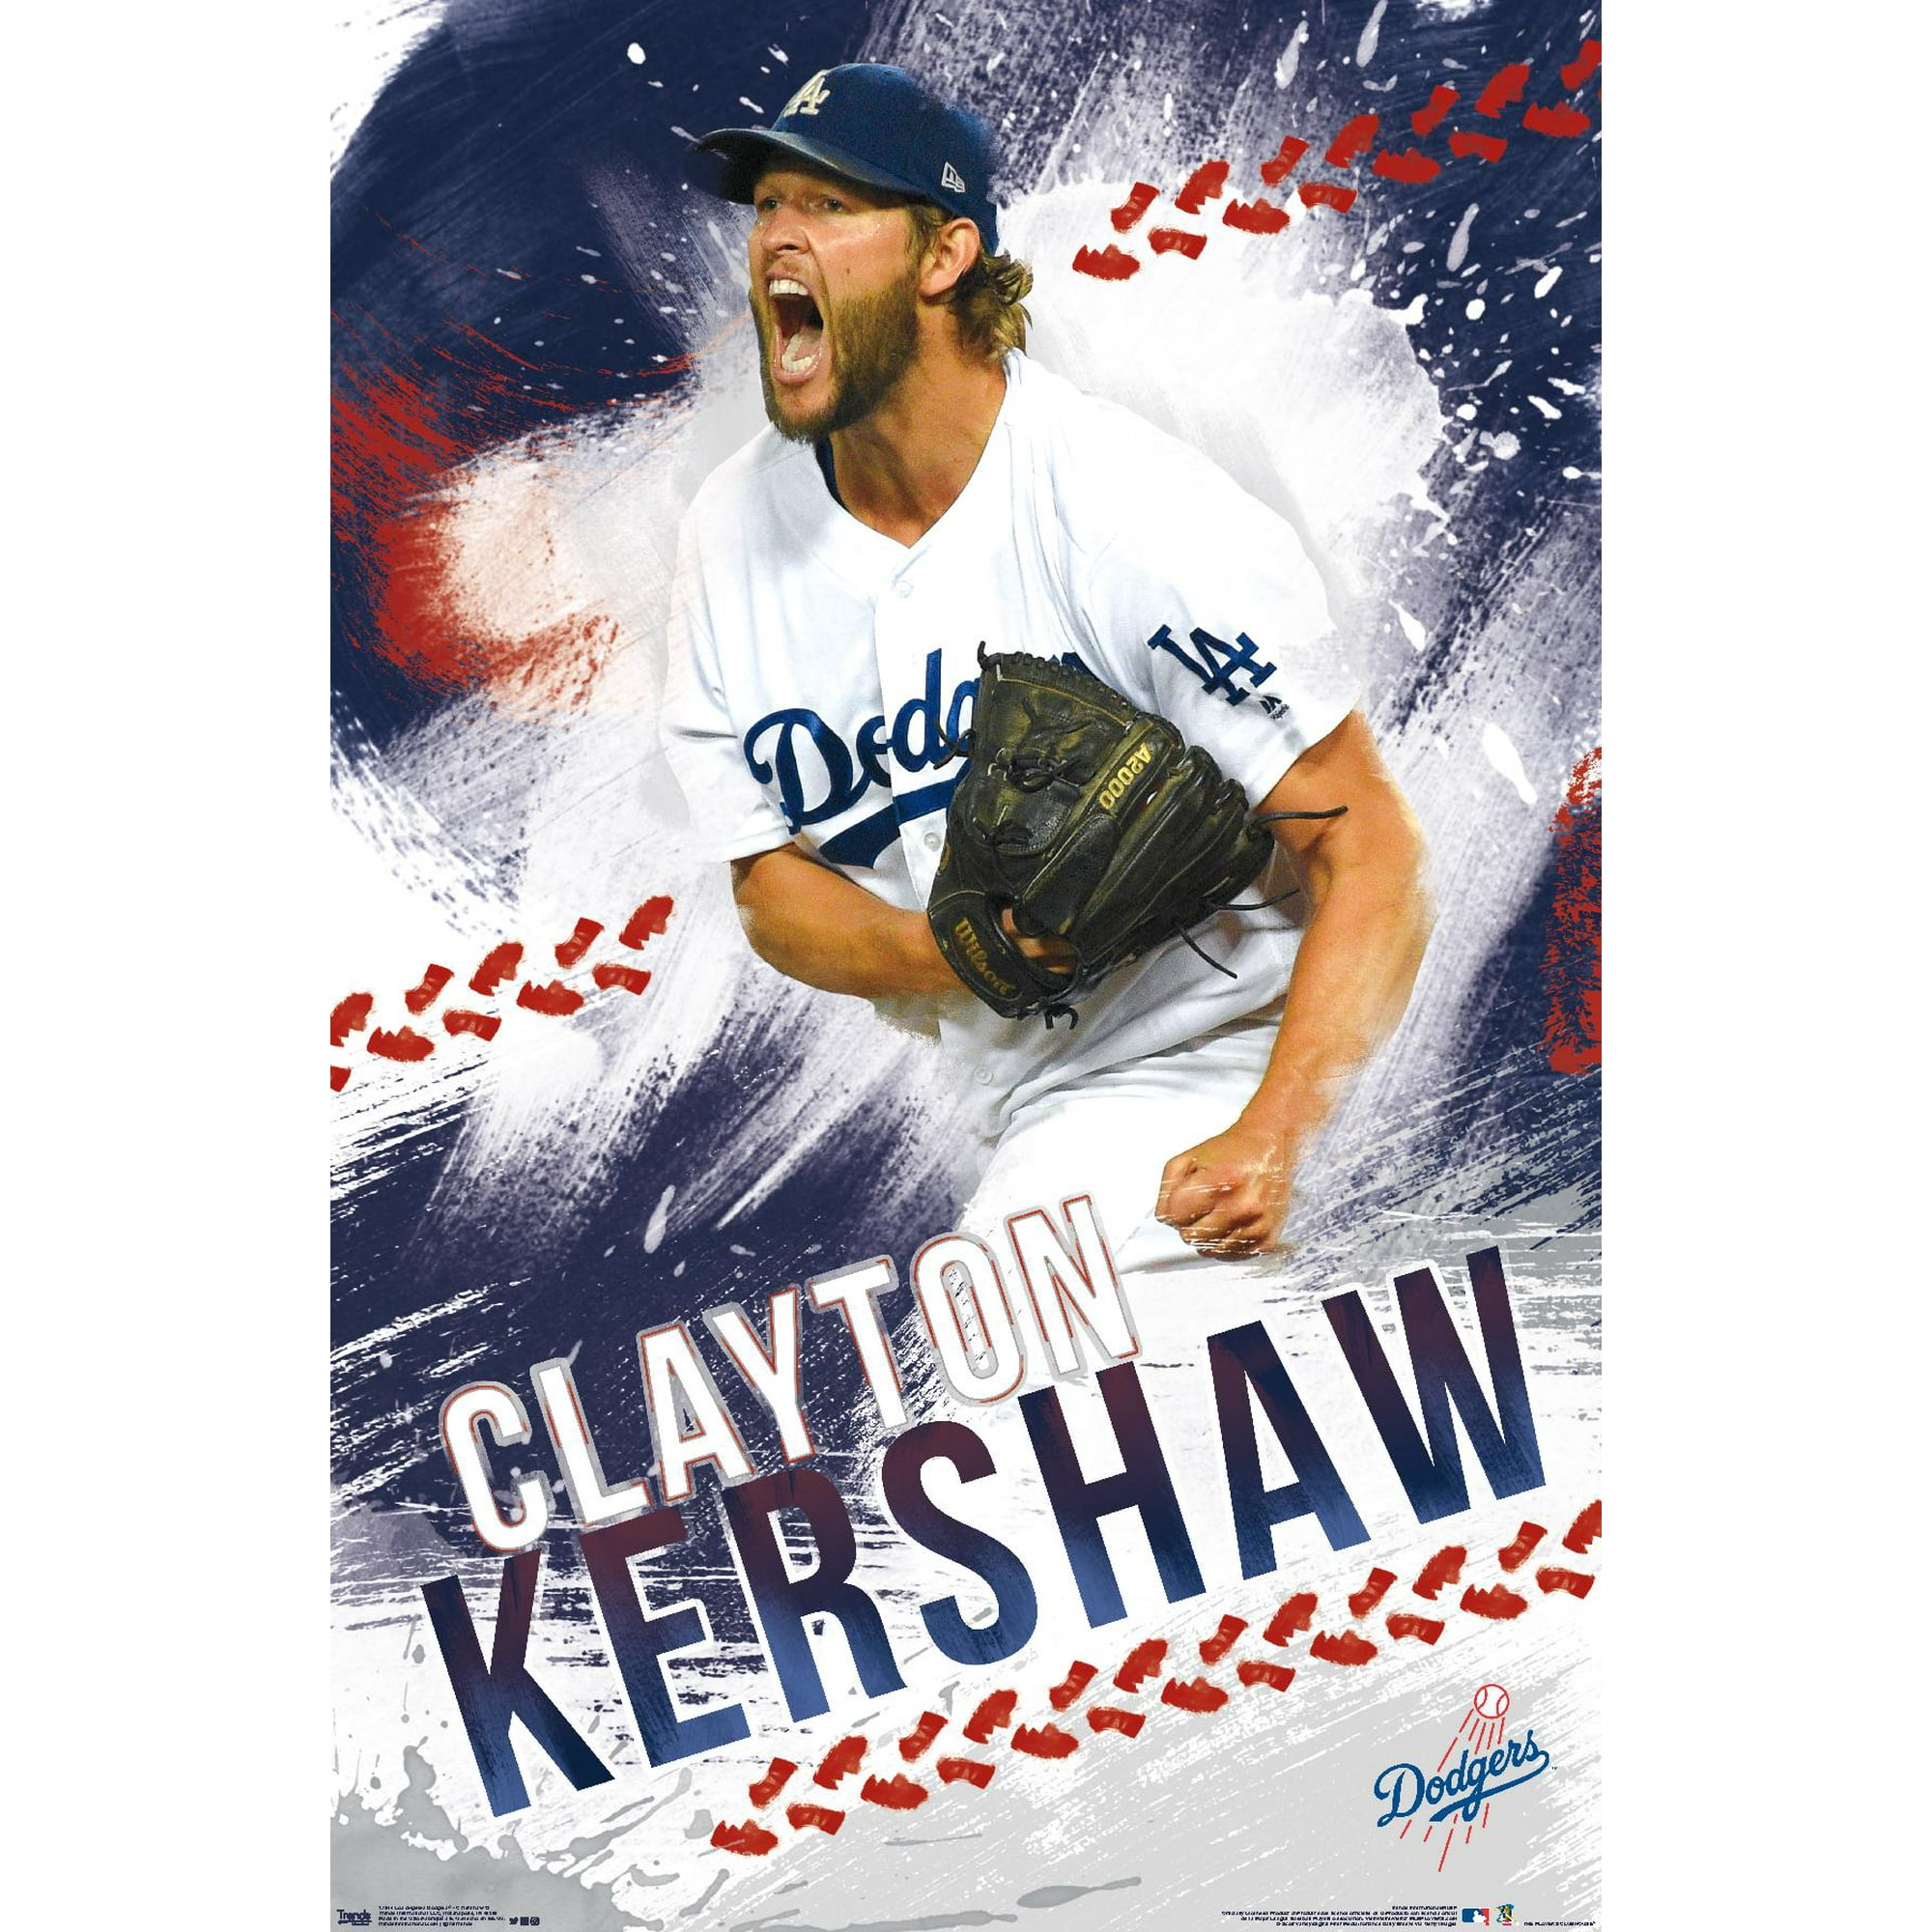 Los Angeles Dodgers Clayton Kershaw Official Gold Authentic Men's